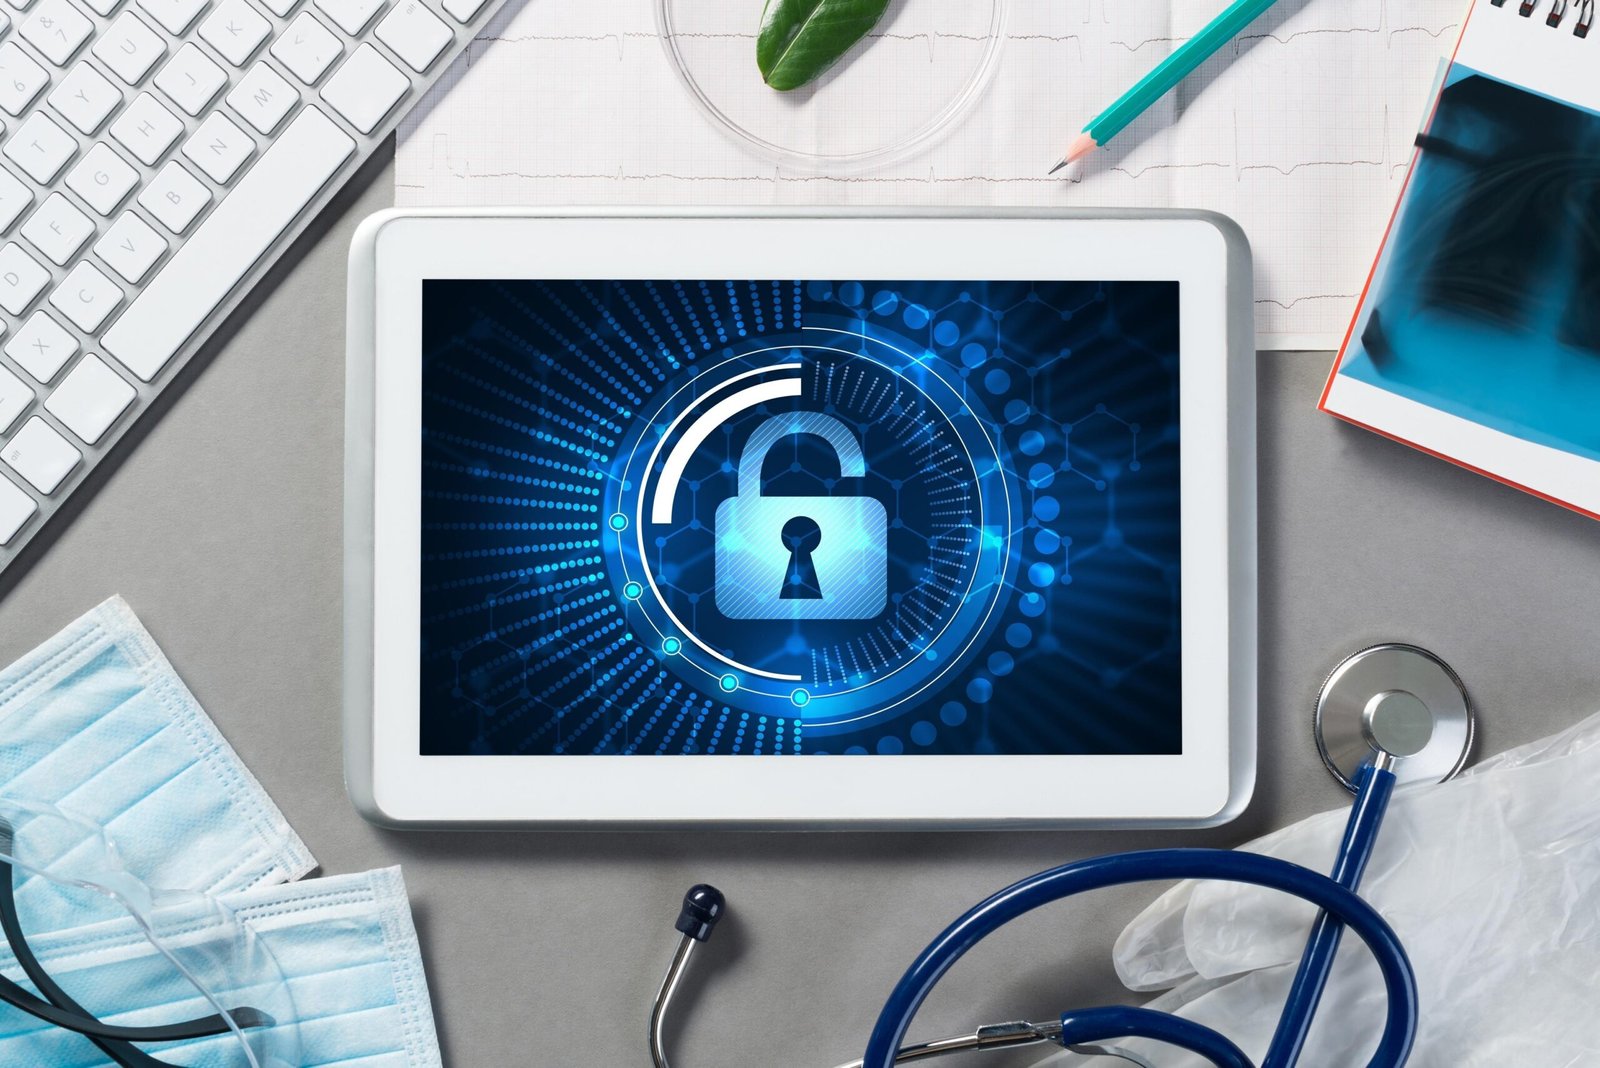 Patient privacy and data security